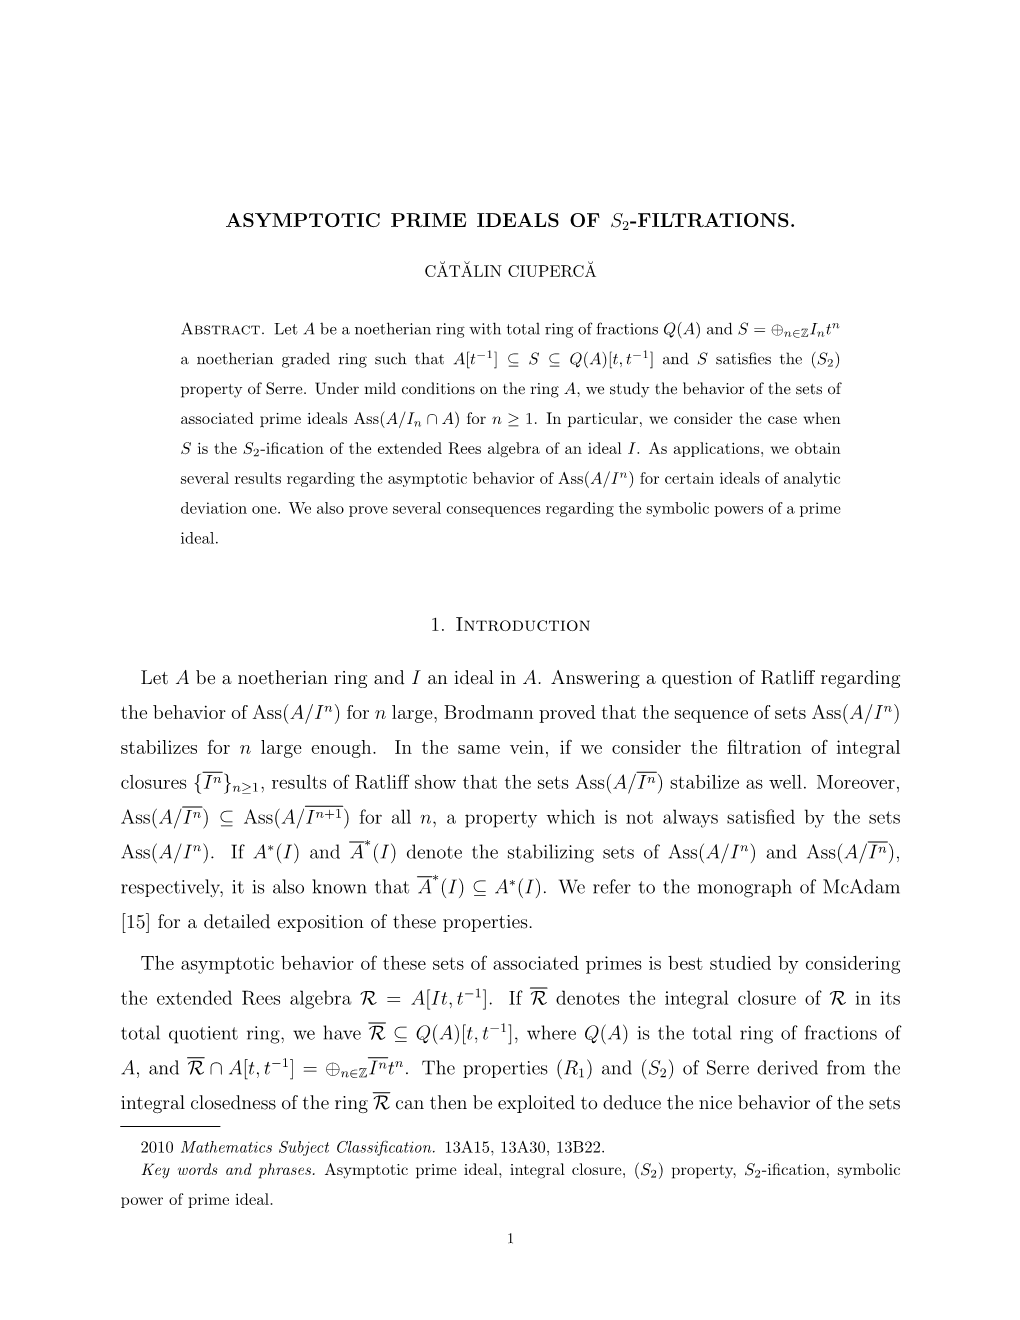 ASYMPTOTIC PRIME IDEALS of S2-FILTRATIONS. 1. Introduction